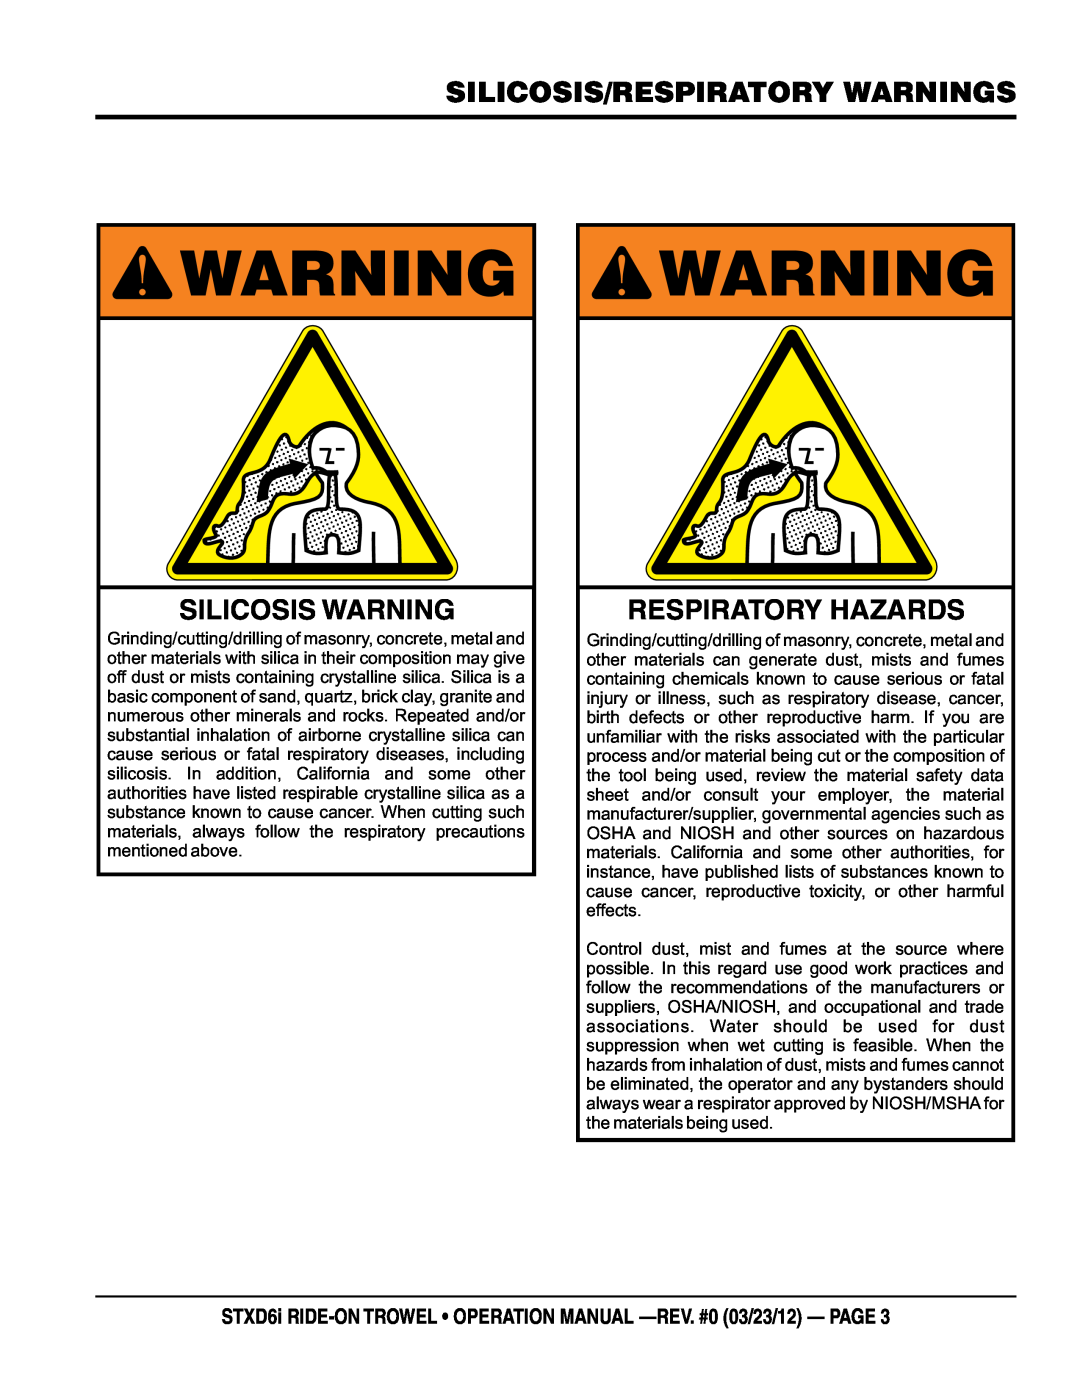 Multiquip STXD6i operation manual silicosis/respiratory warnings, Silicosis Warning, Respiratory Hazards 